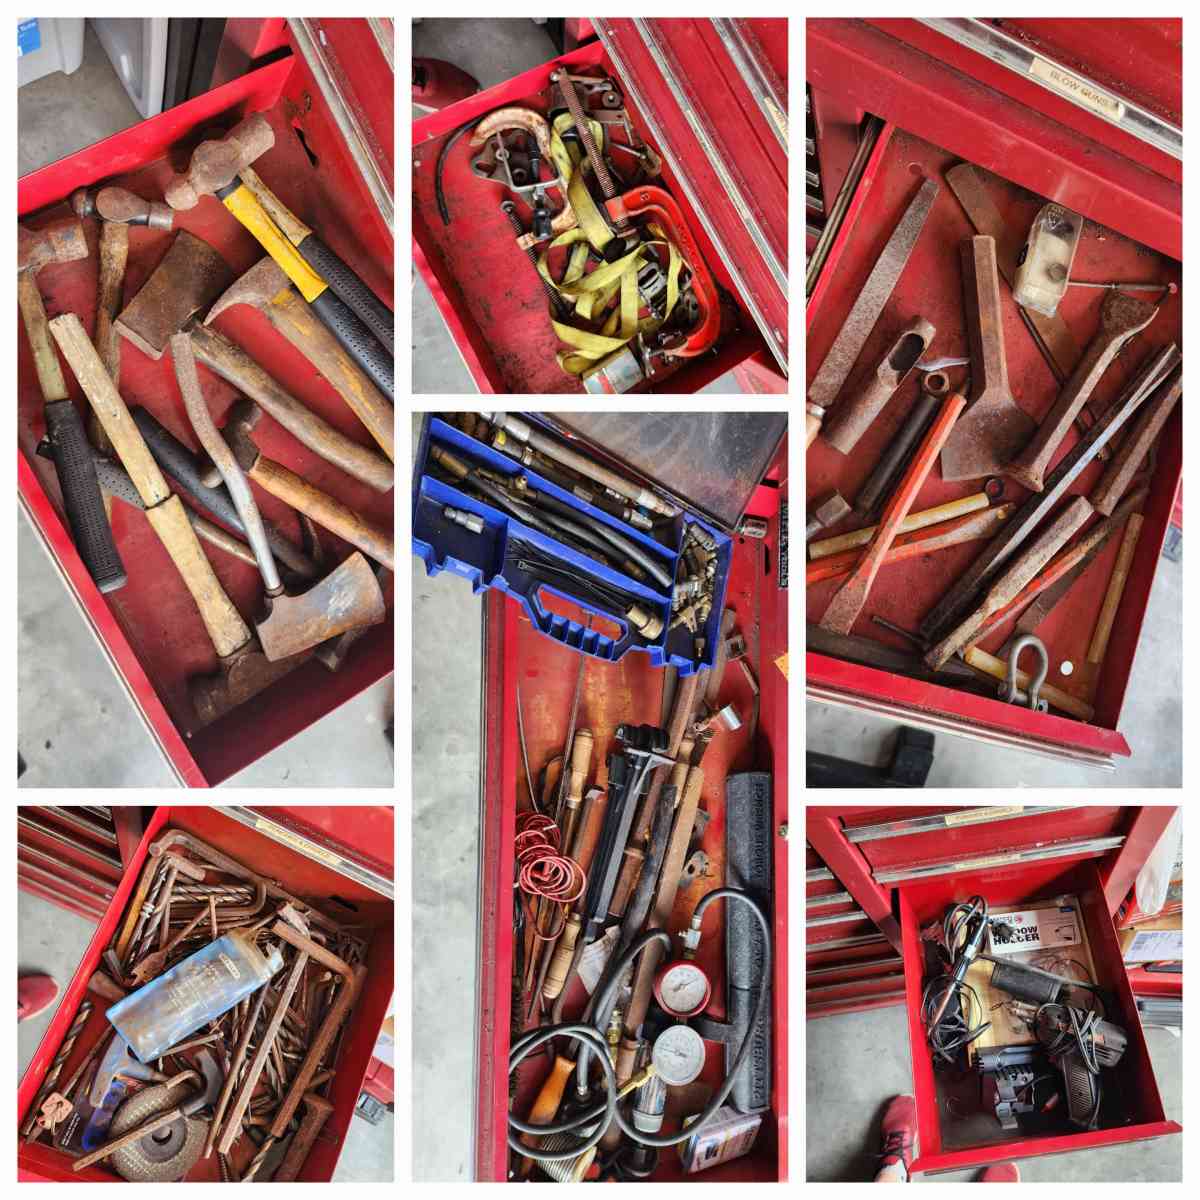 large top and bottom box full of tools